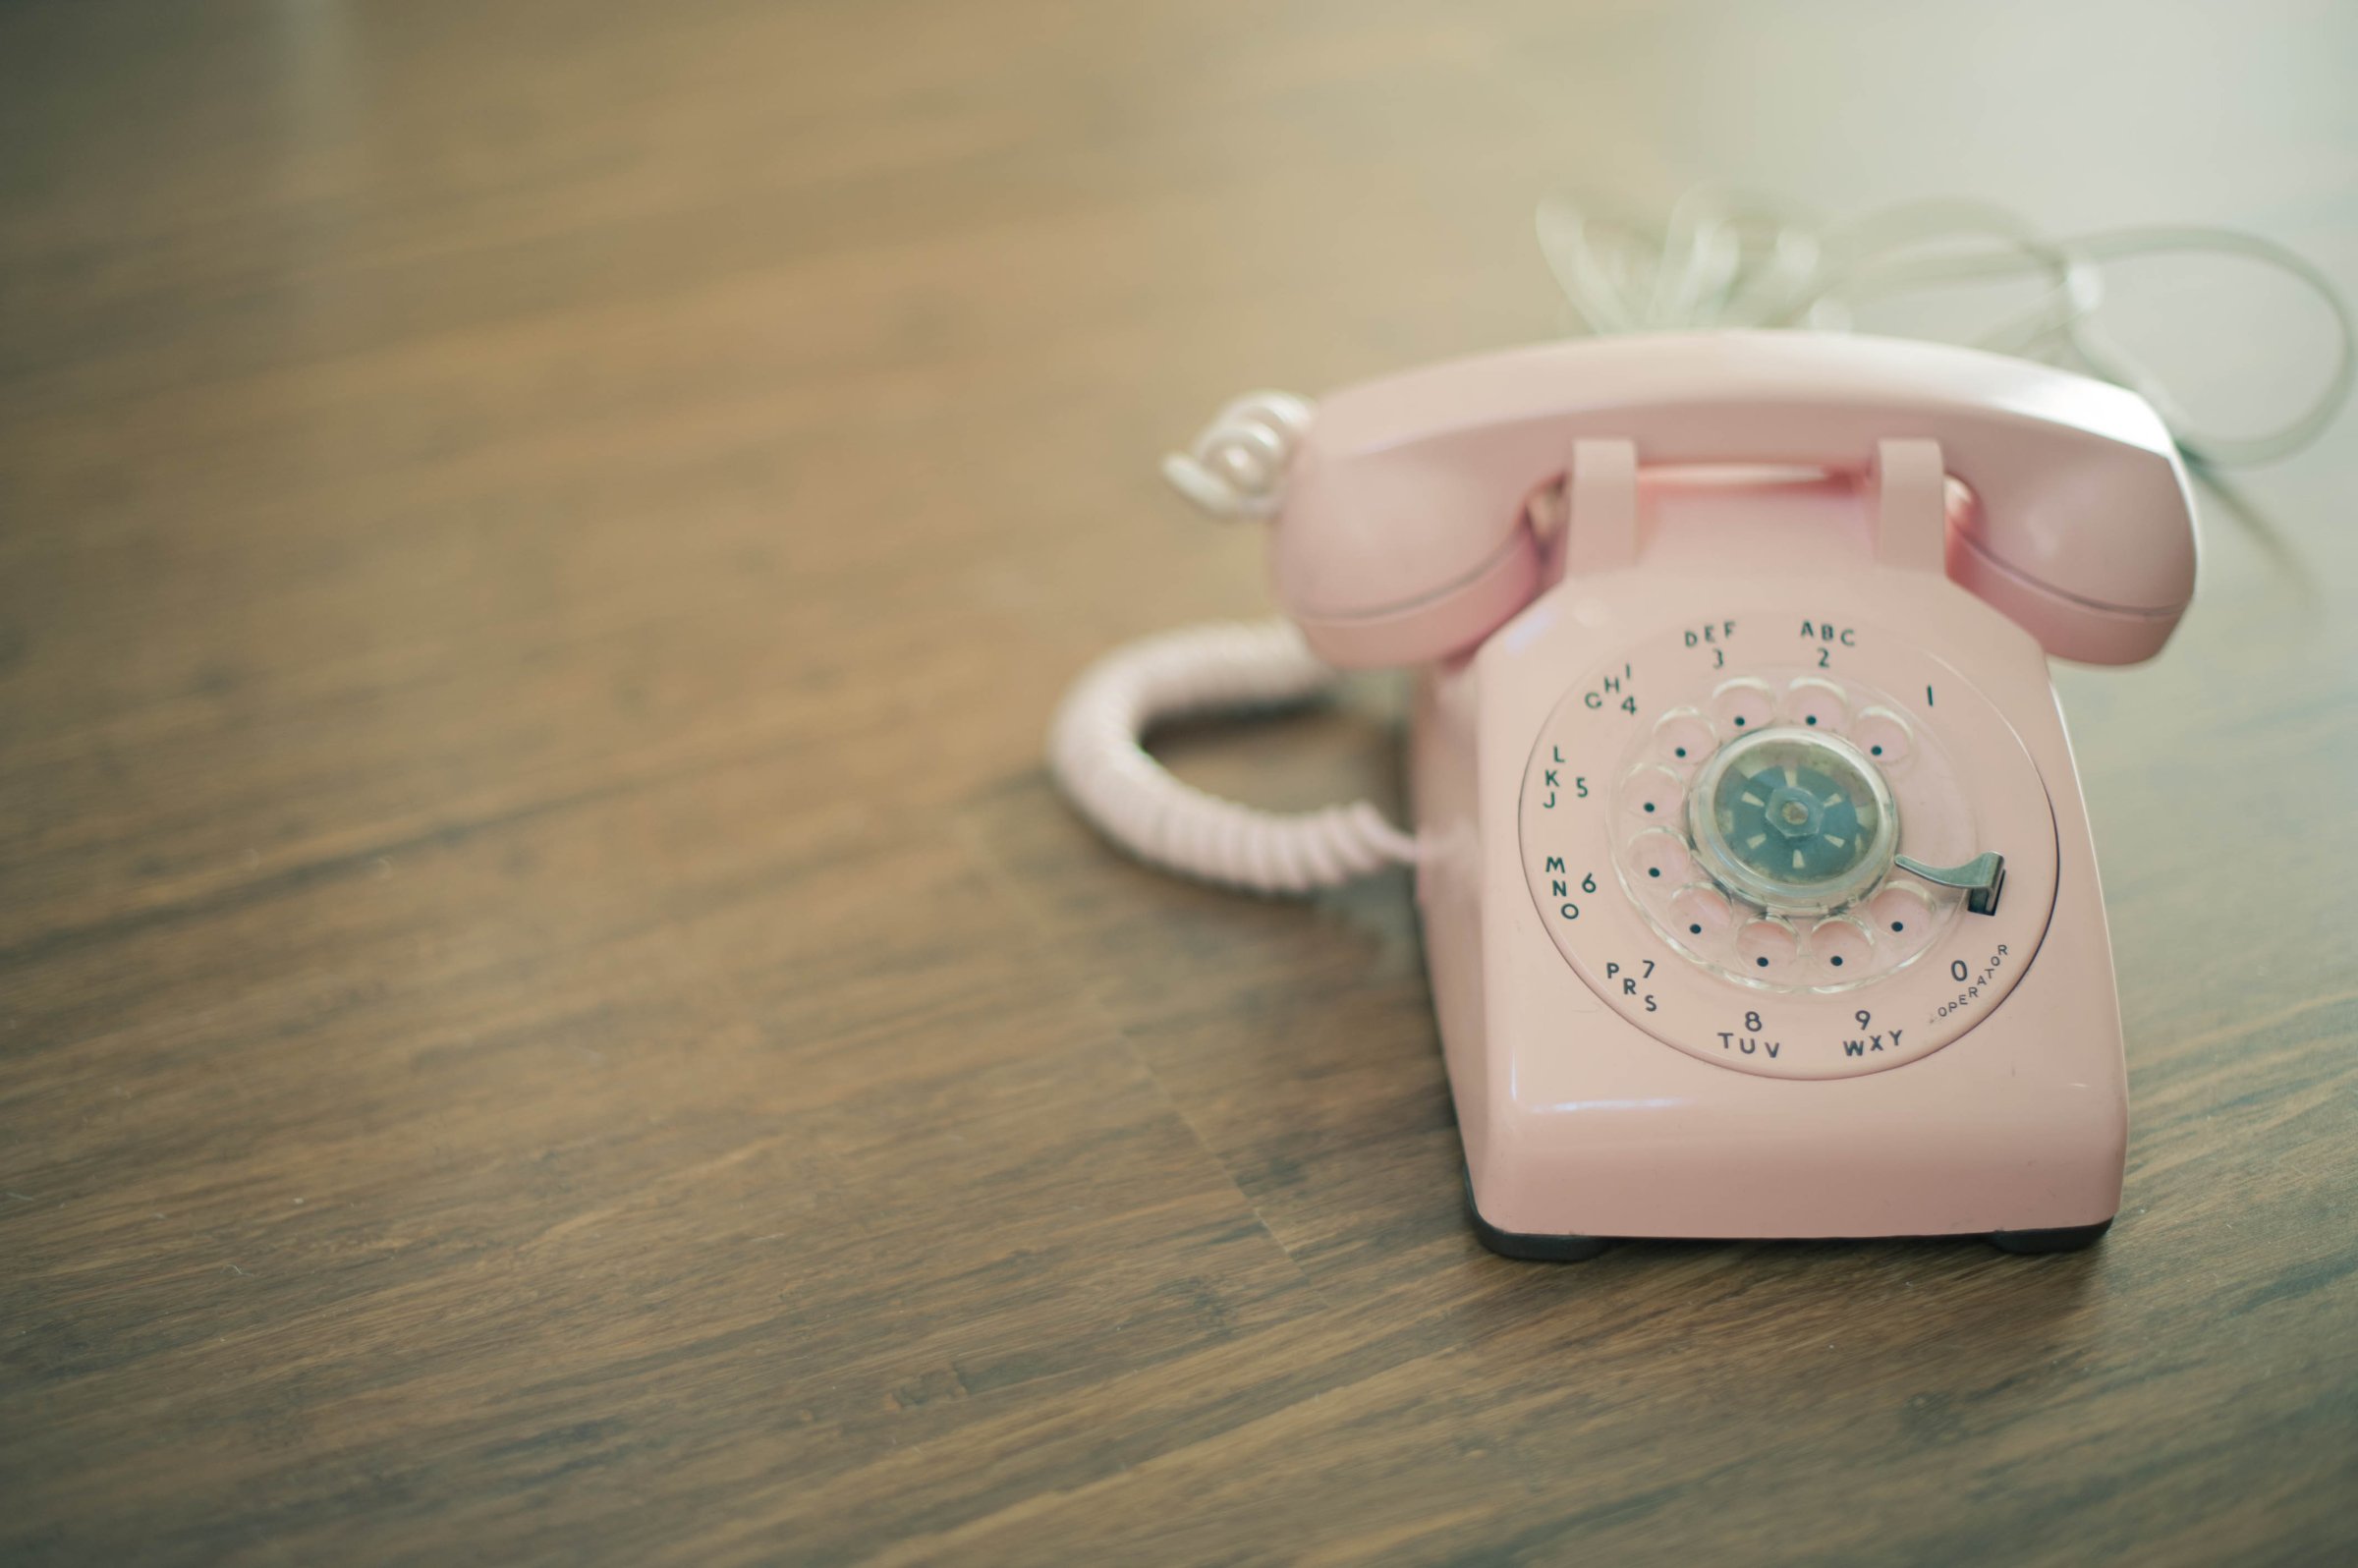 Pink rotary telephone on wood surface.